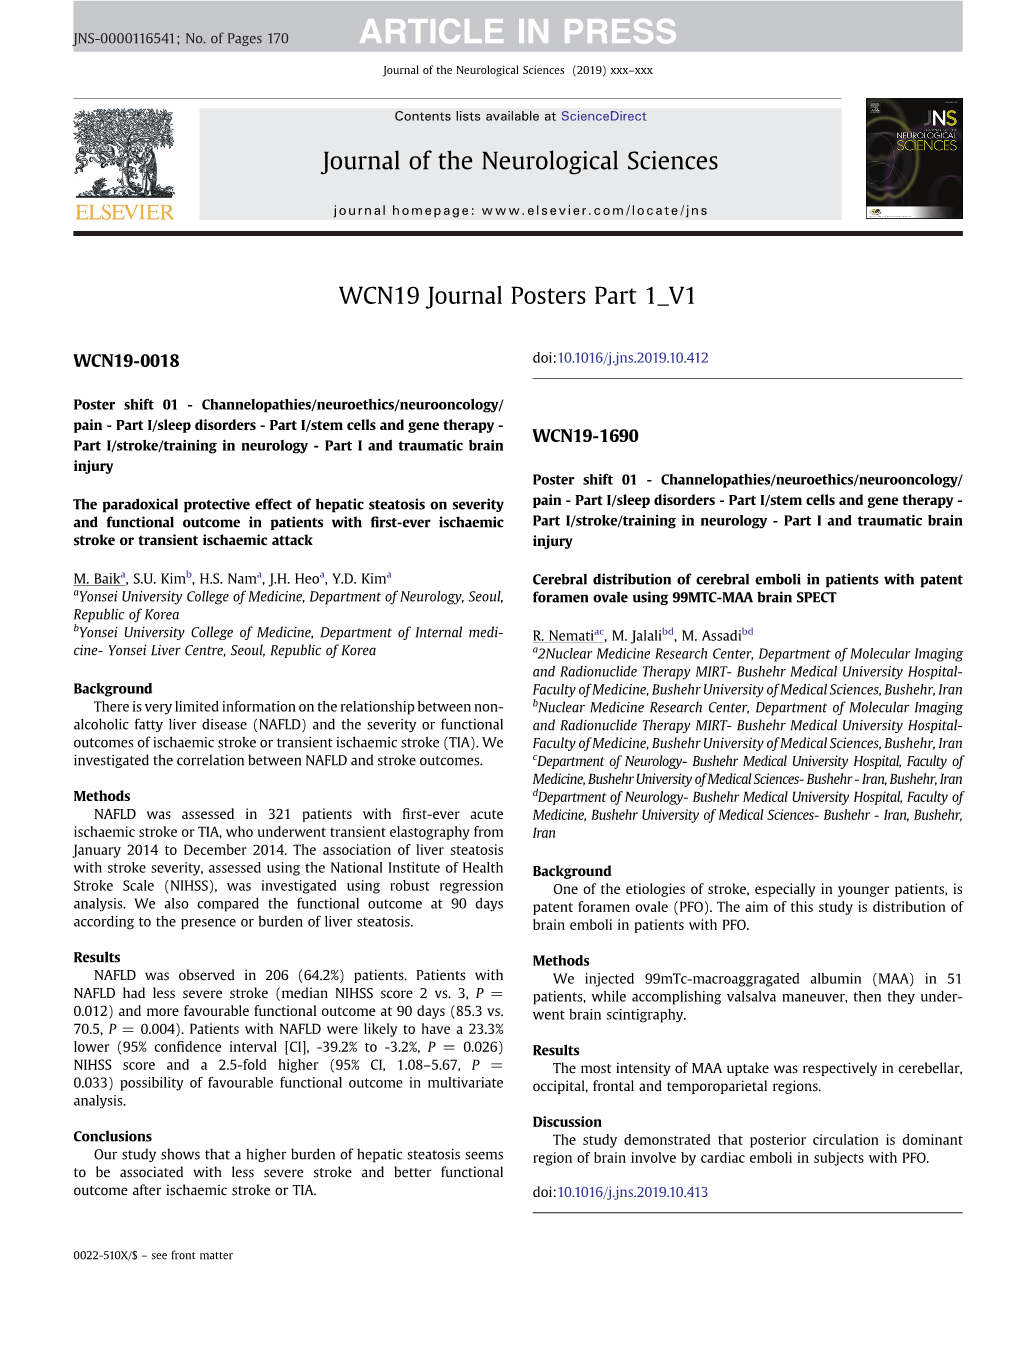 WCN19 Journal Posters Part 1 V1